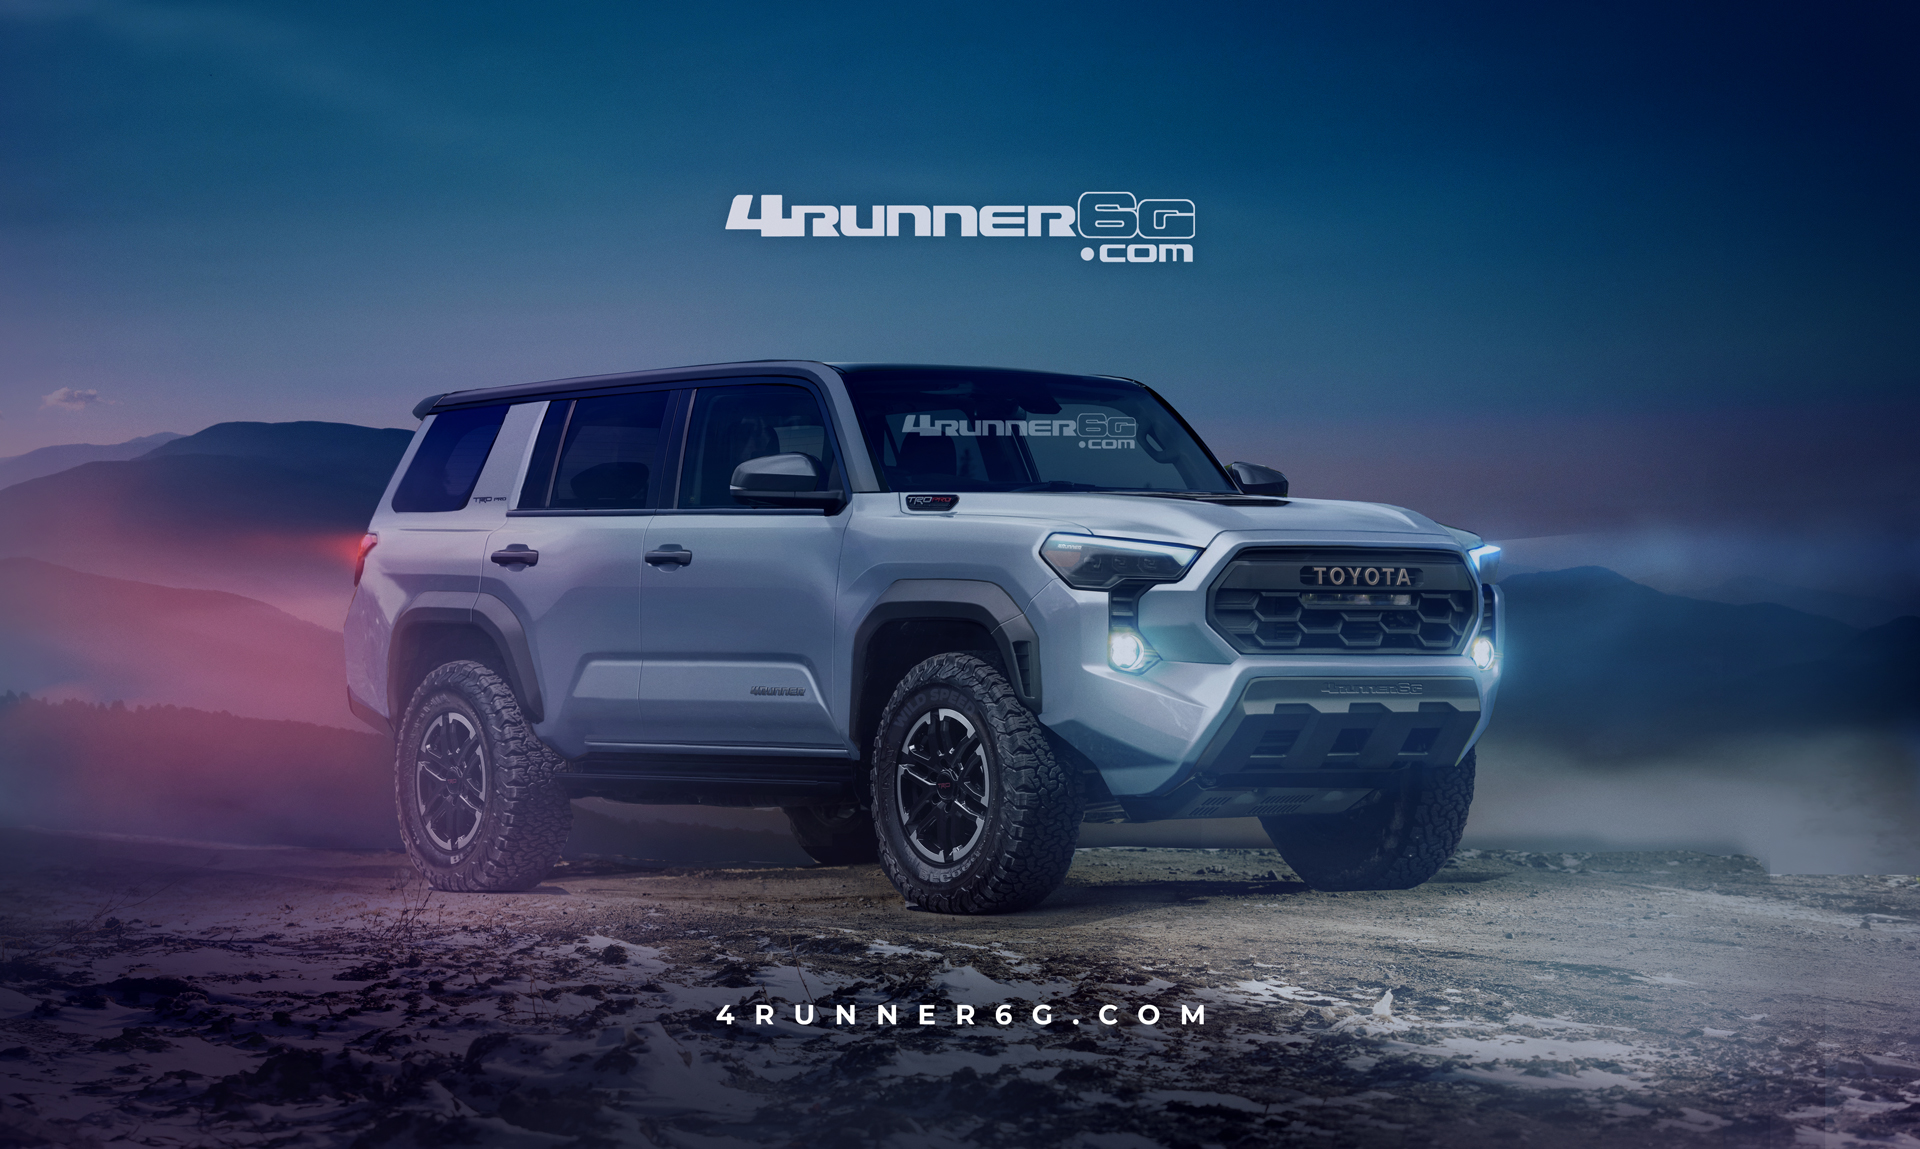 2025 Toyota 4runner 2025 4Runner (6th Gen) News, Specs, Engines, Release Date, Production Date & Preview Renderings -- Insider Info (as of 7/30/23) 2025 Toyota-4Runner-Front-TRD-Silver